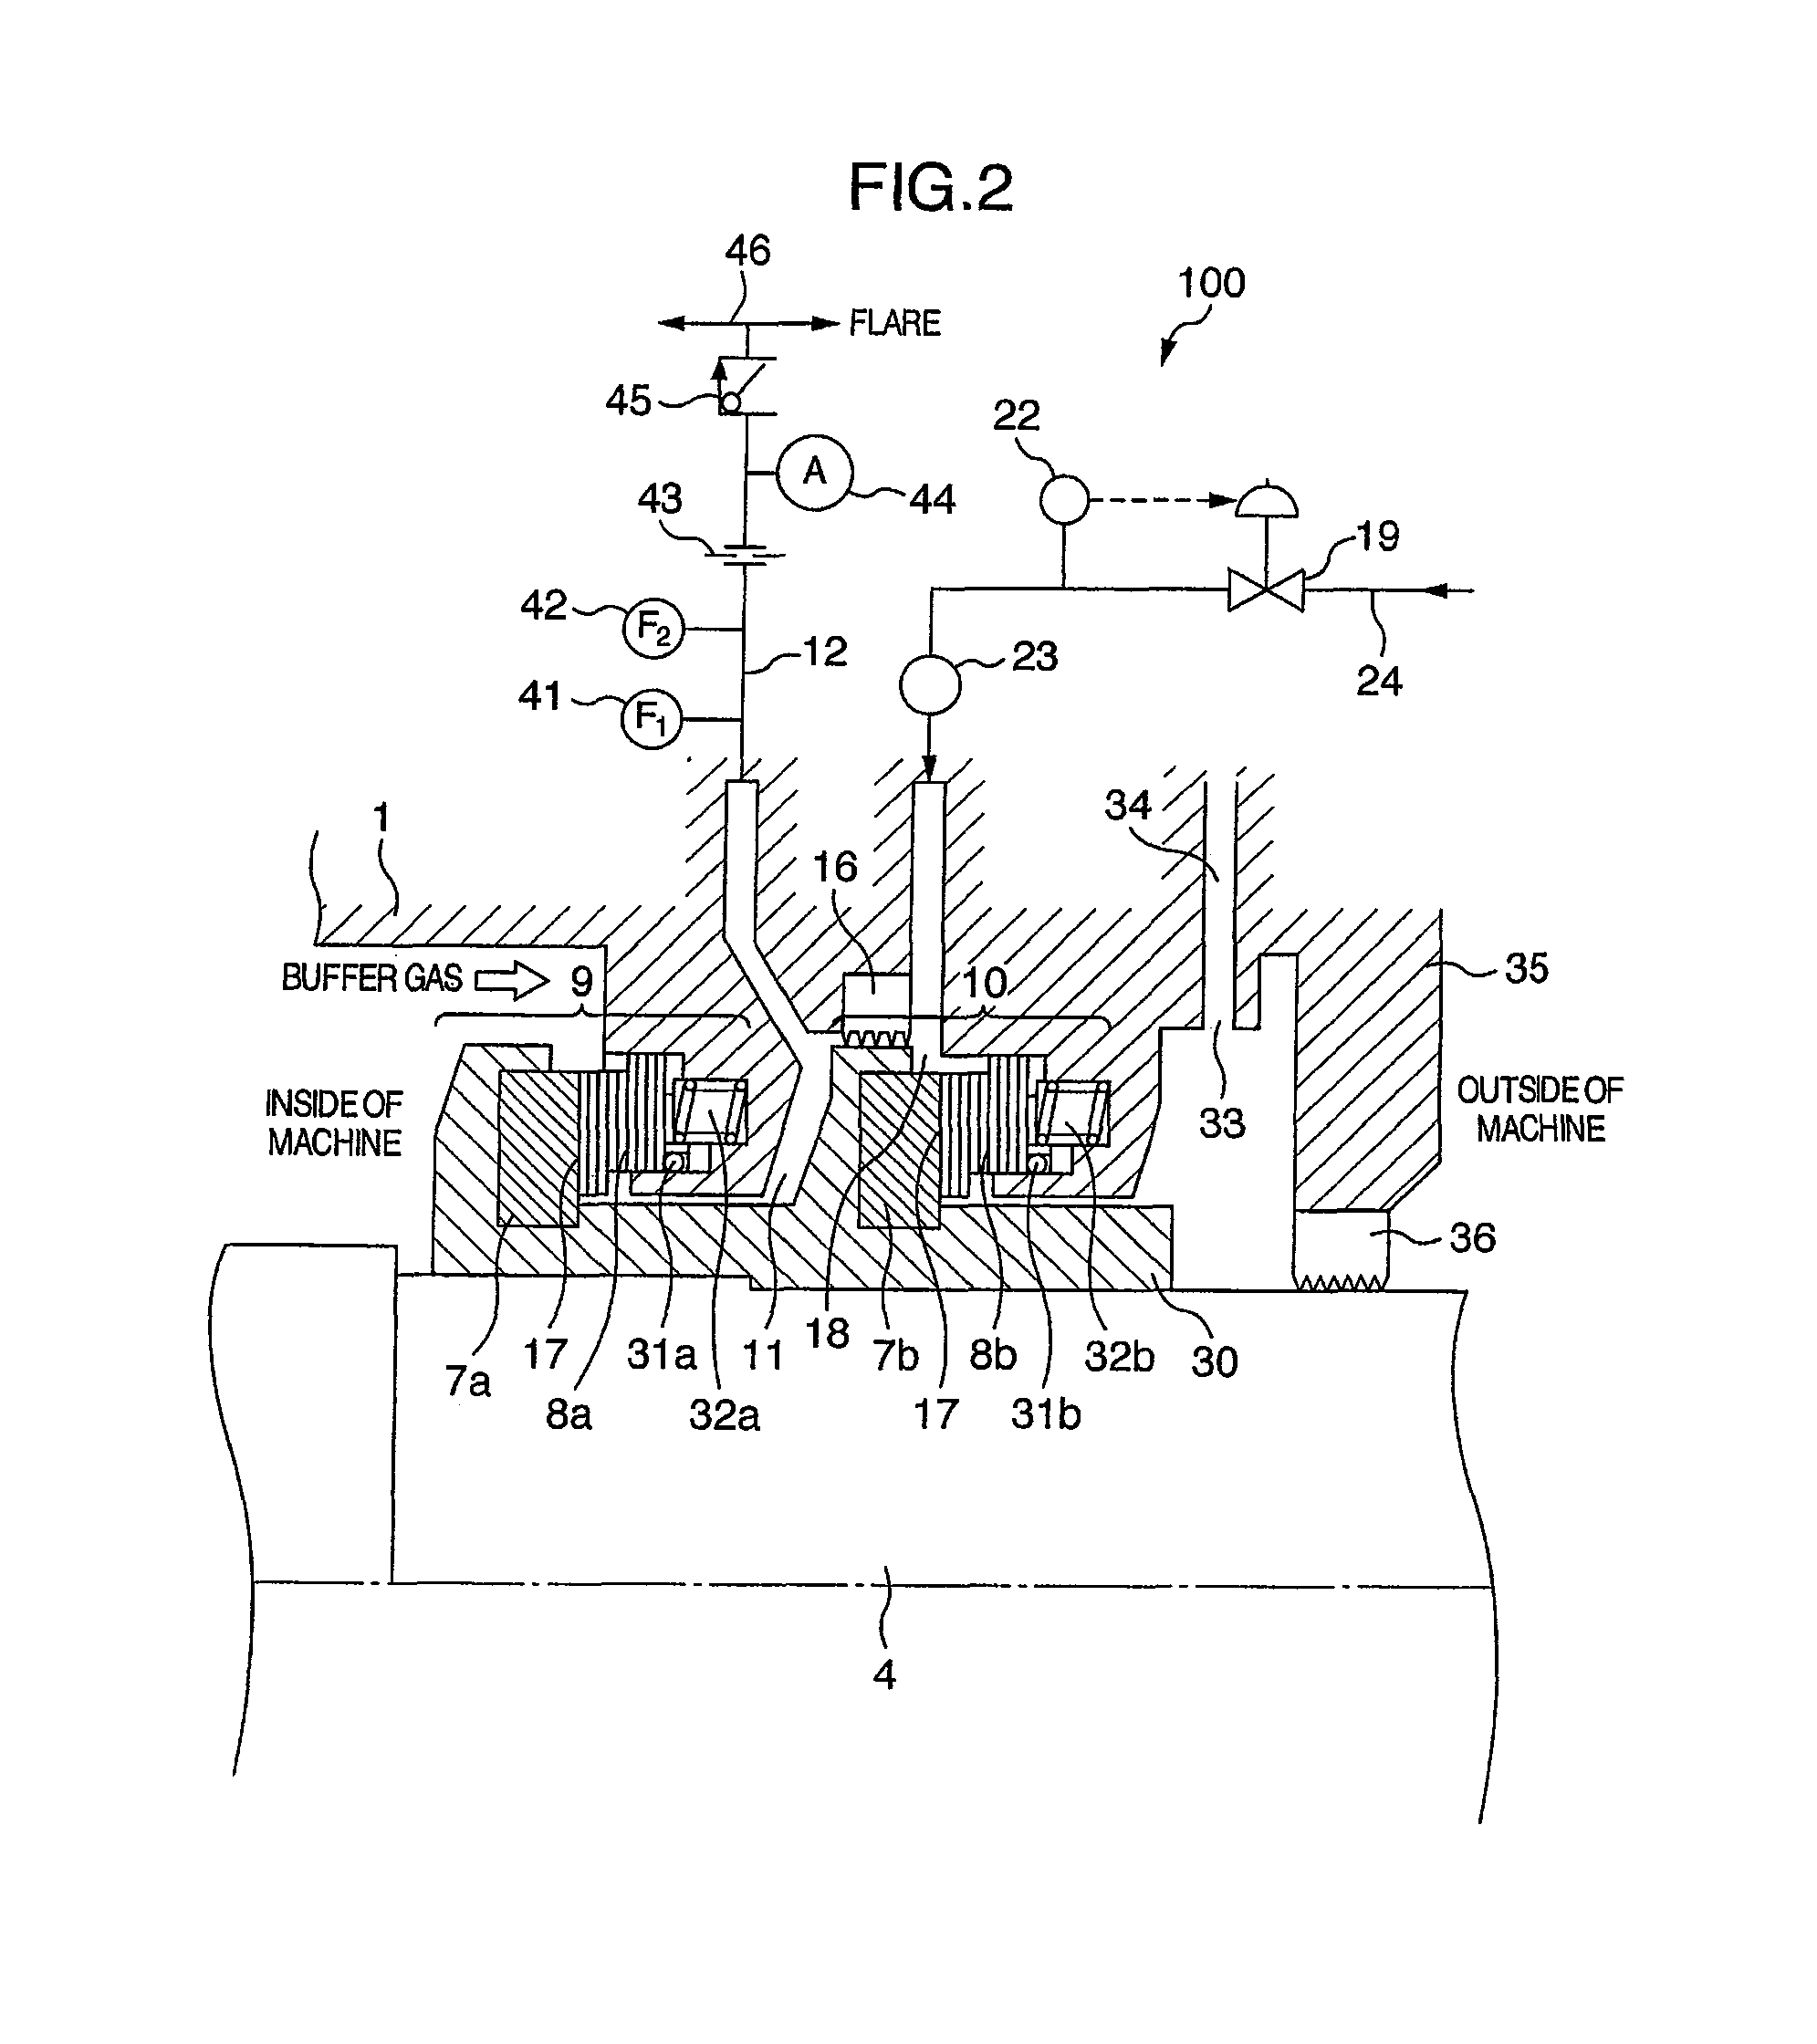 Centrifugal compressor and dry gas seal system for use in it